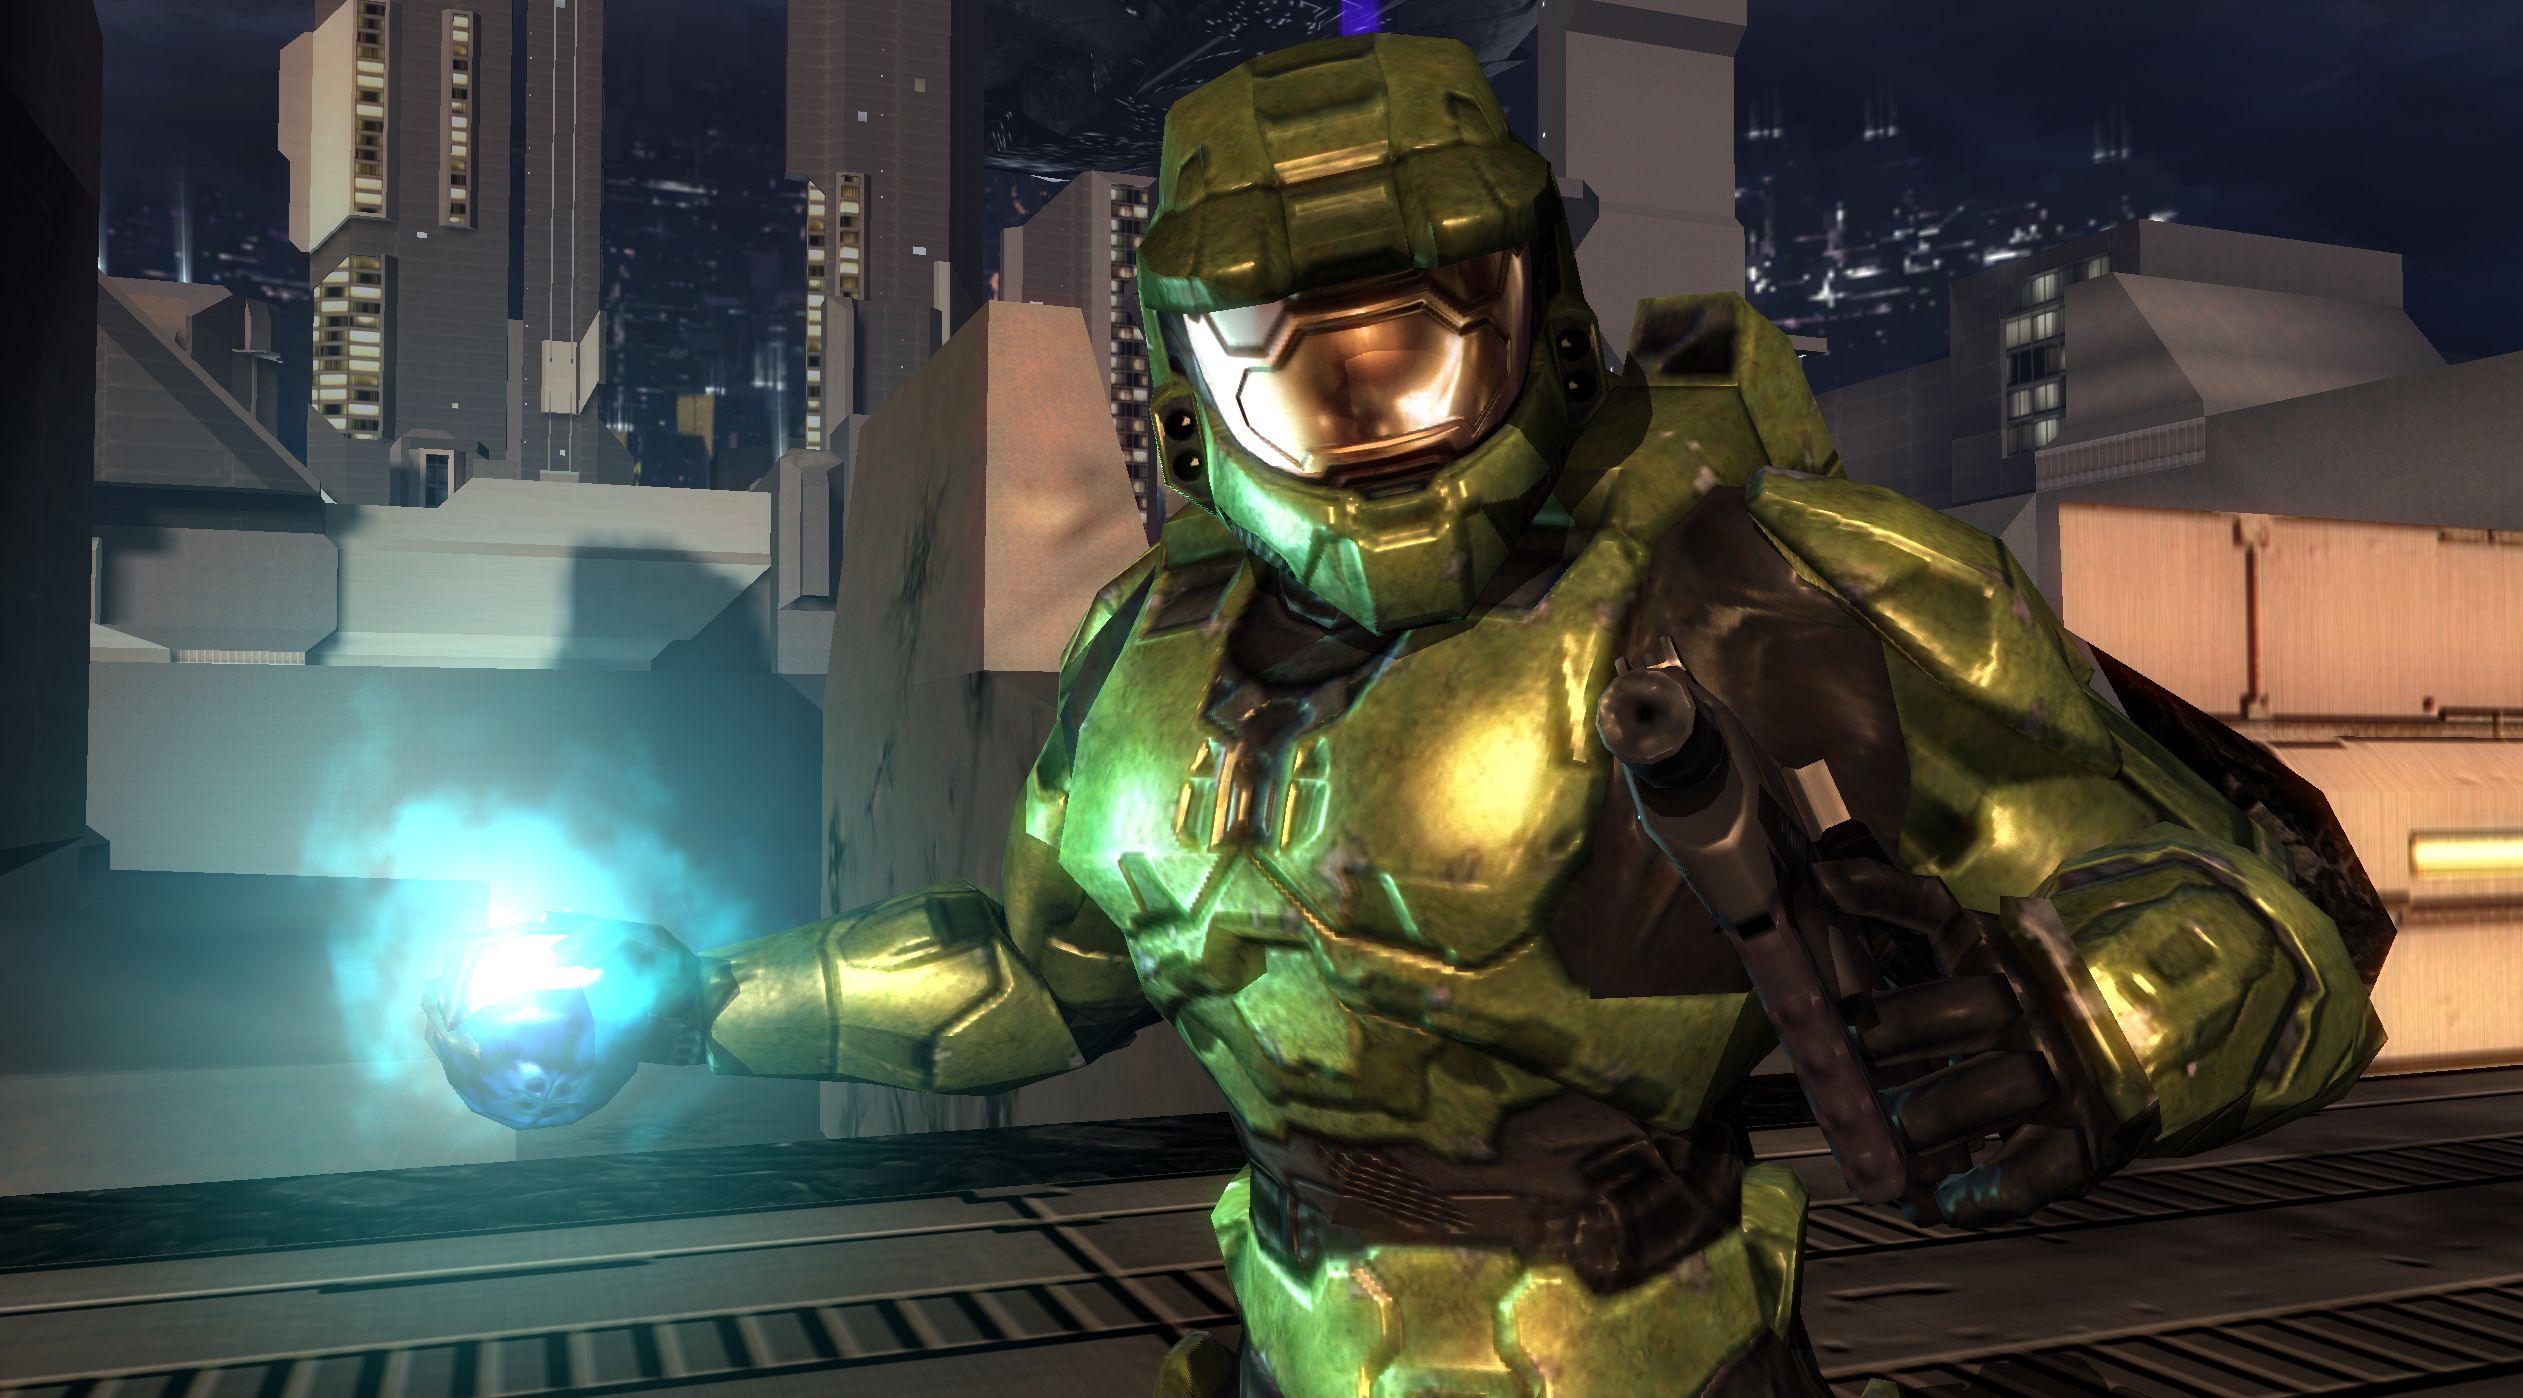 Love Halo? You could win up to $250 in Microsofts new virtual Halo 2 tournament TechRadar